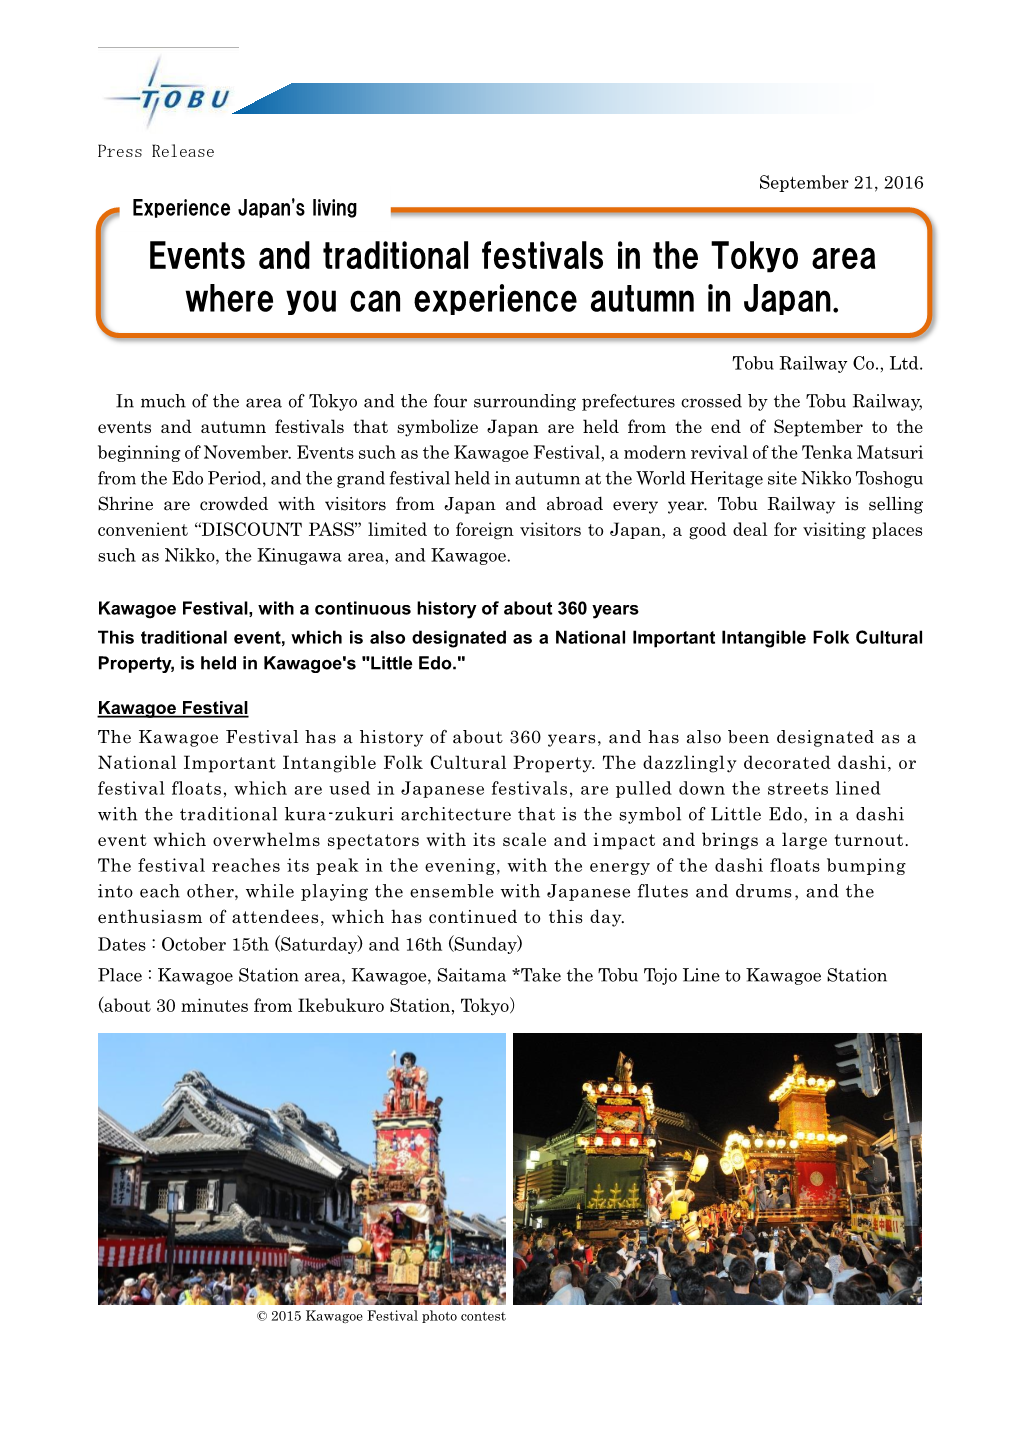 Events and Traditional Festivals in the Tokyo Area Where You Can